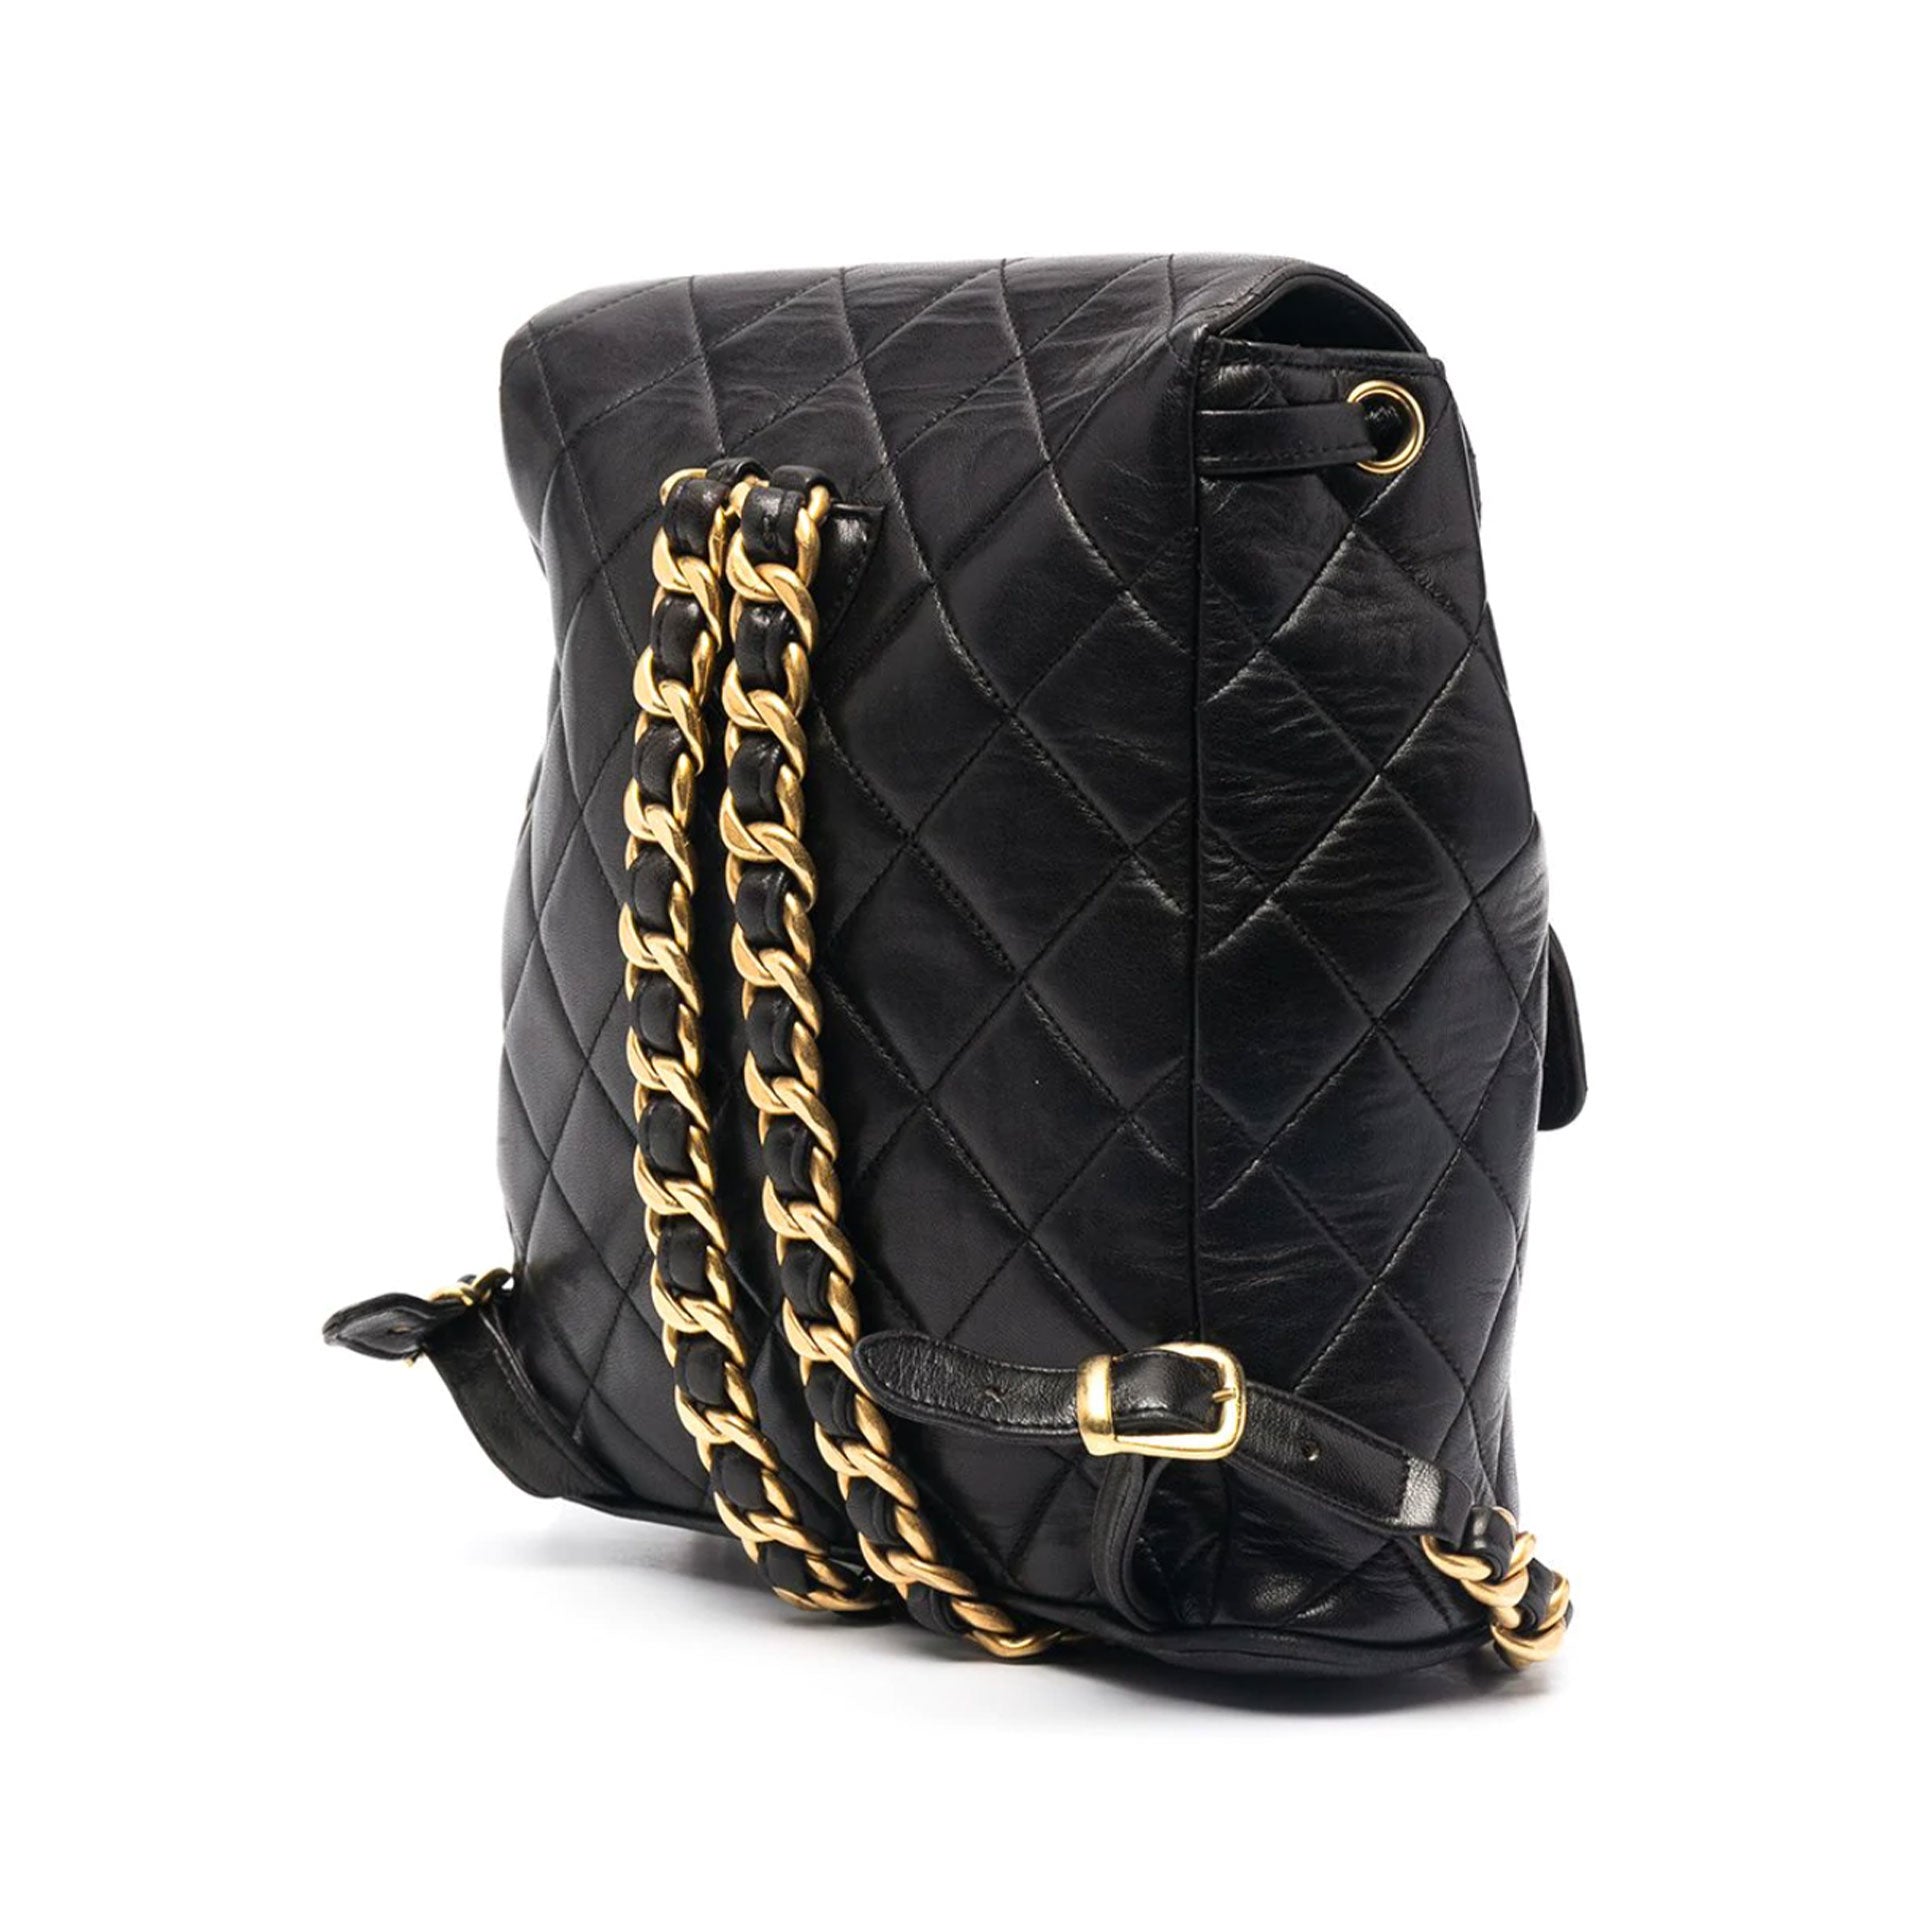 Chanel Black Quilted Lambskin Leather Duma Backpack Chanel